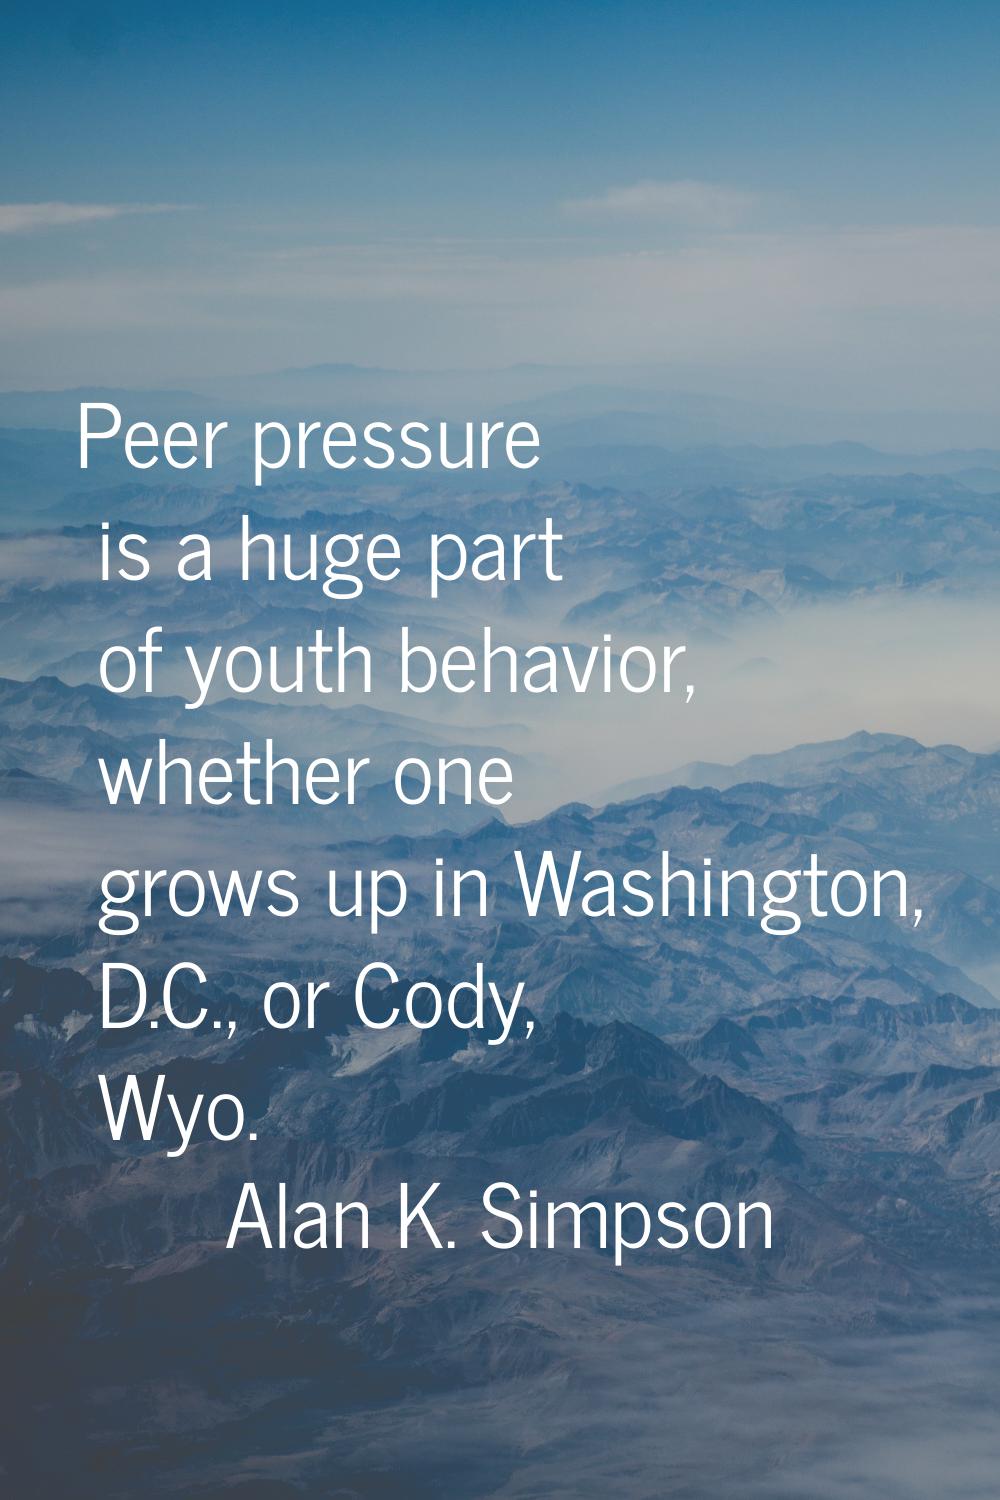 Peer pressure is a huge part of youth behavior, whether one grows up in Washington, D.C., or Cody, 